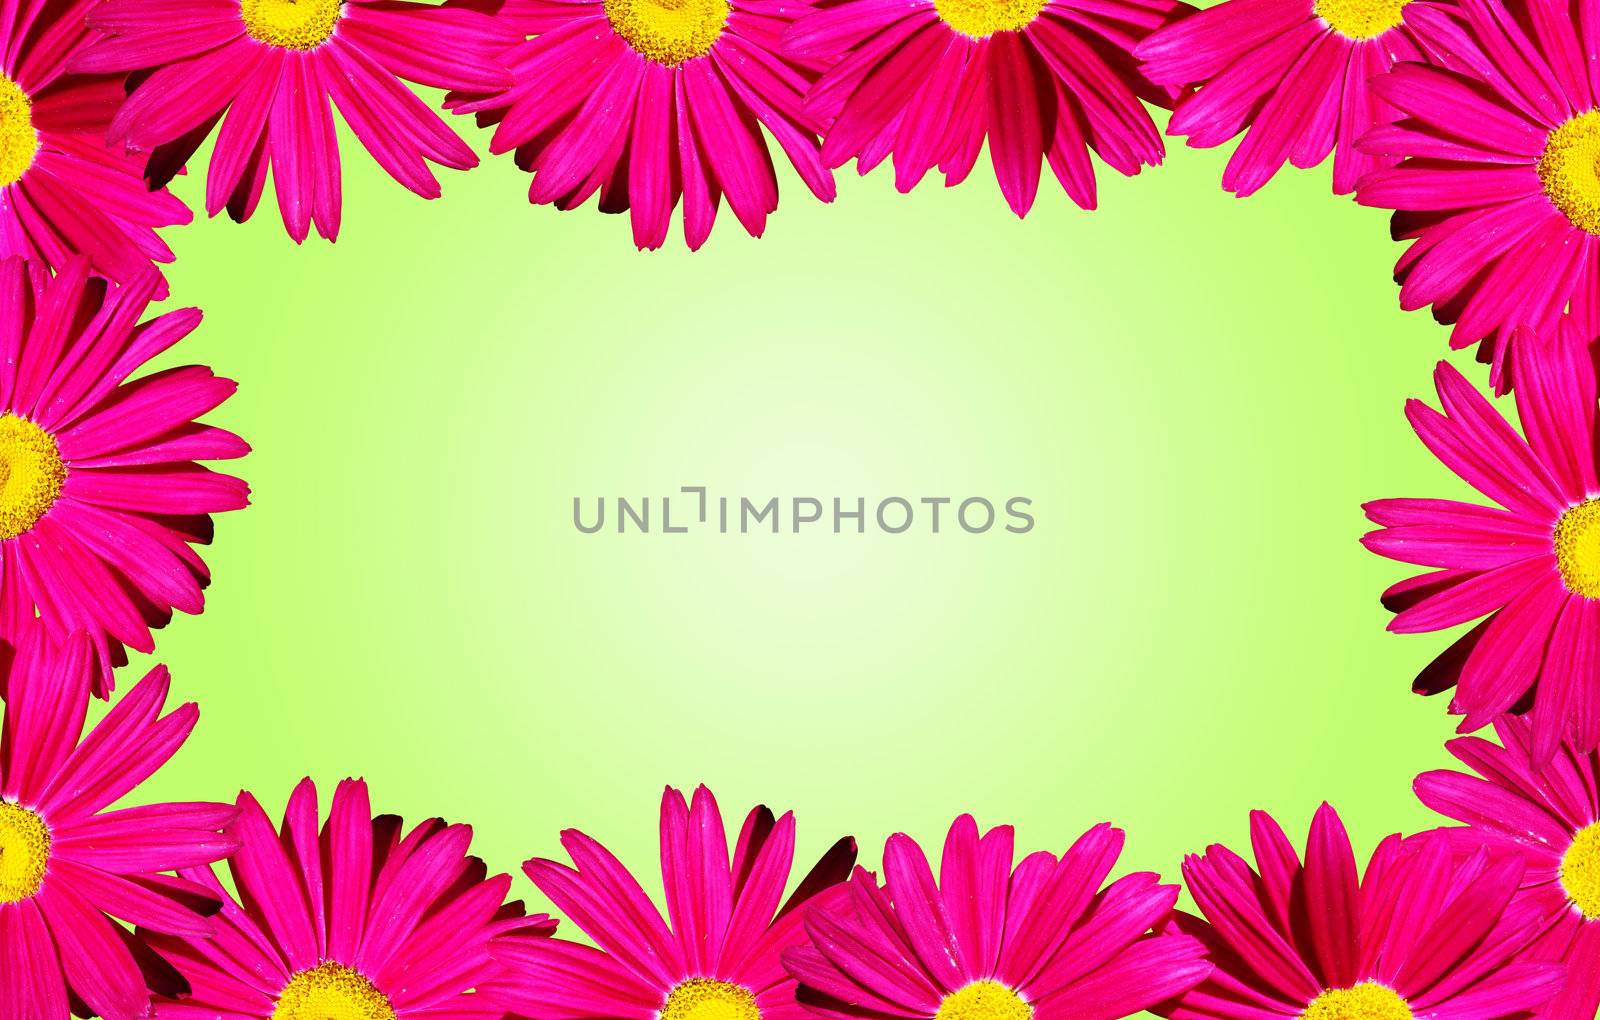 It's spring: Bright pink daisy flowers forming a border over a spring baby green background.               